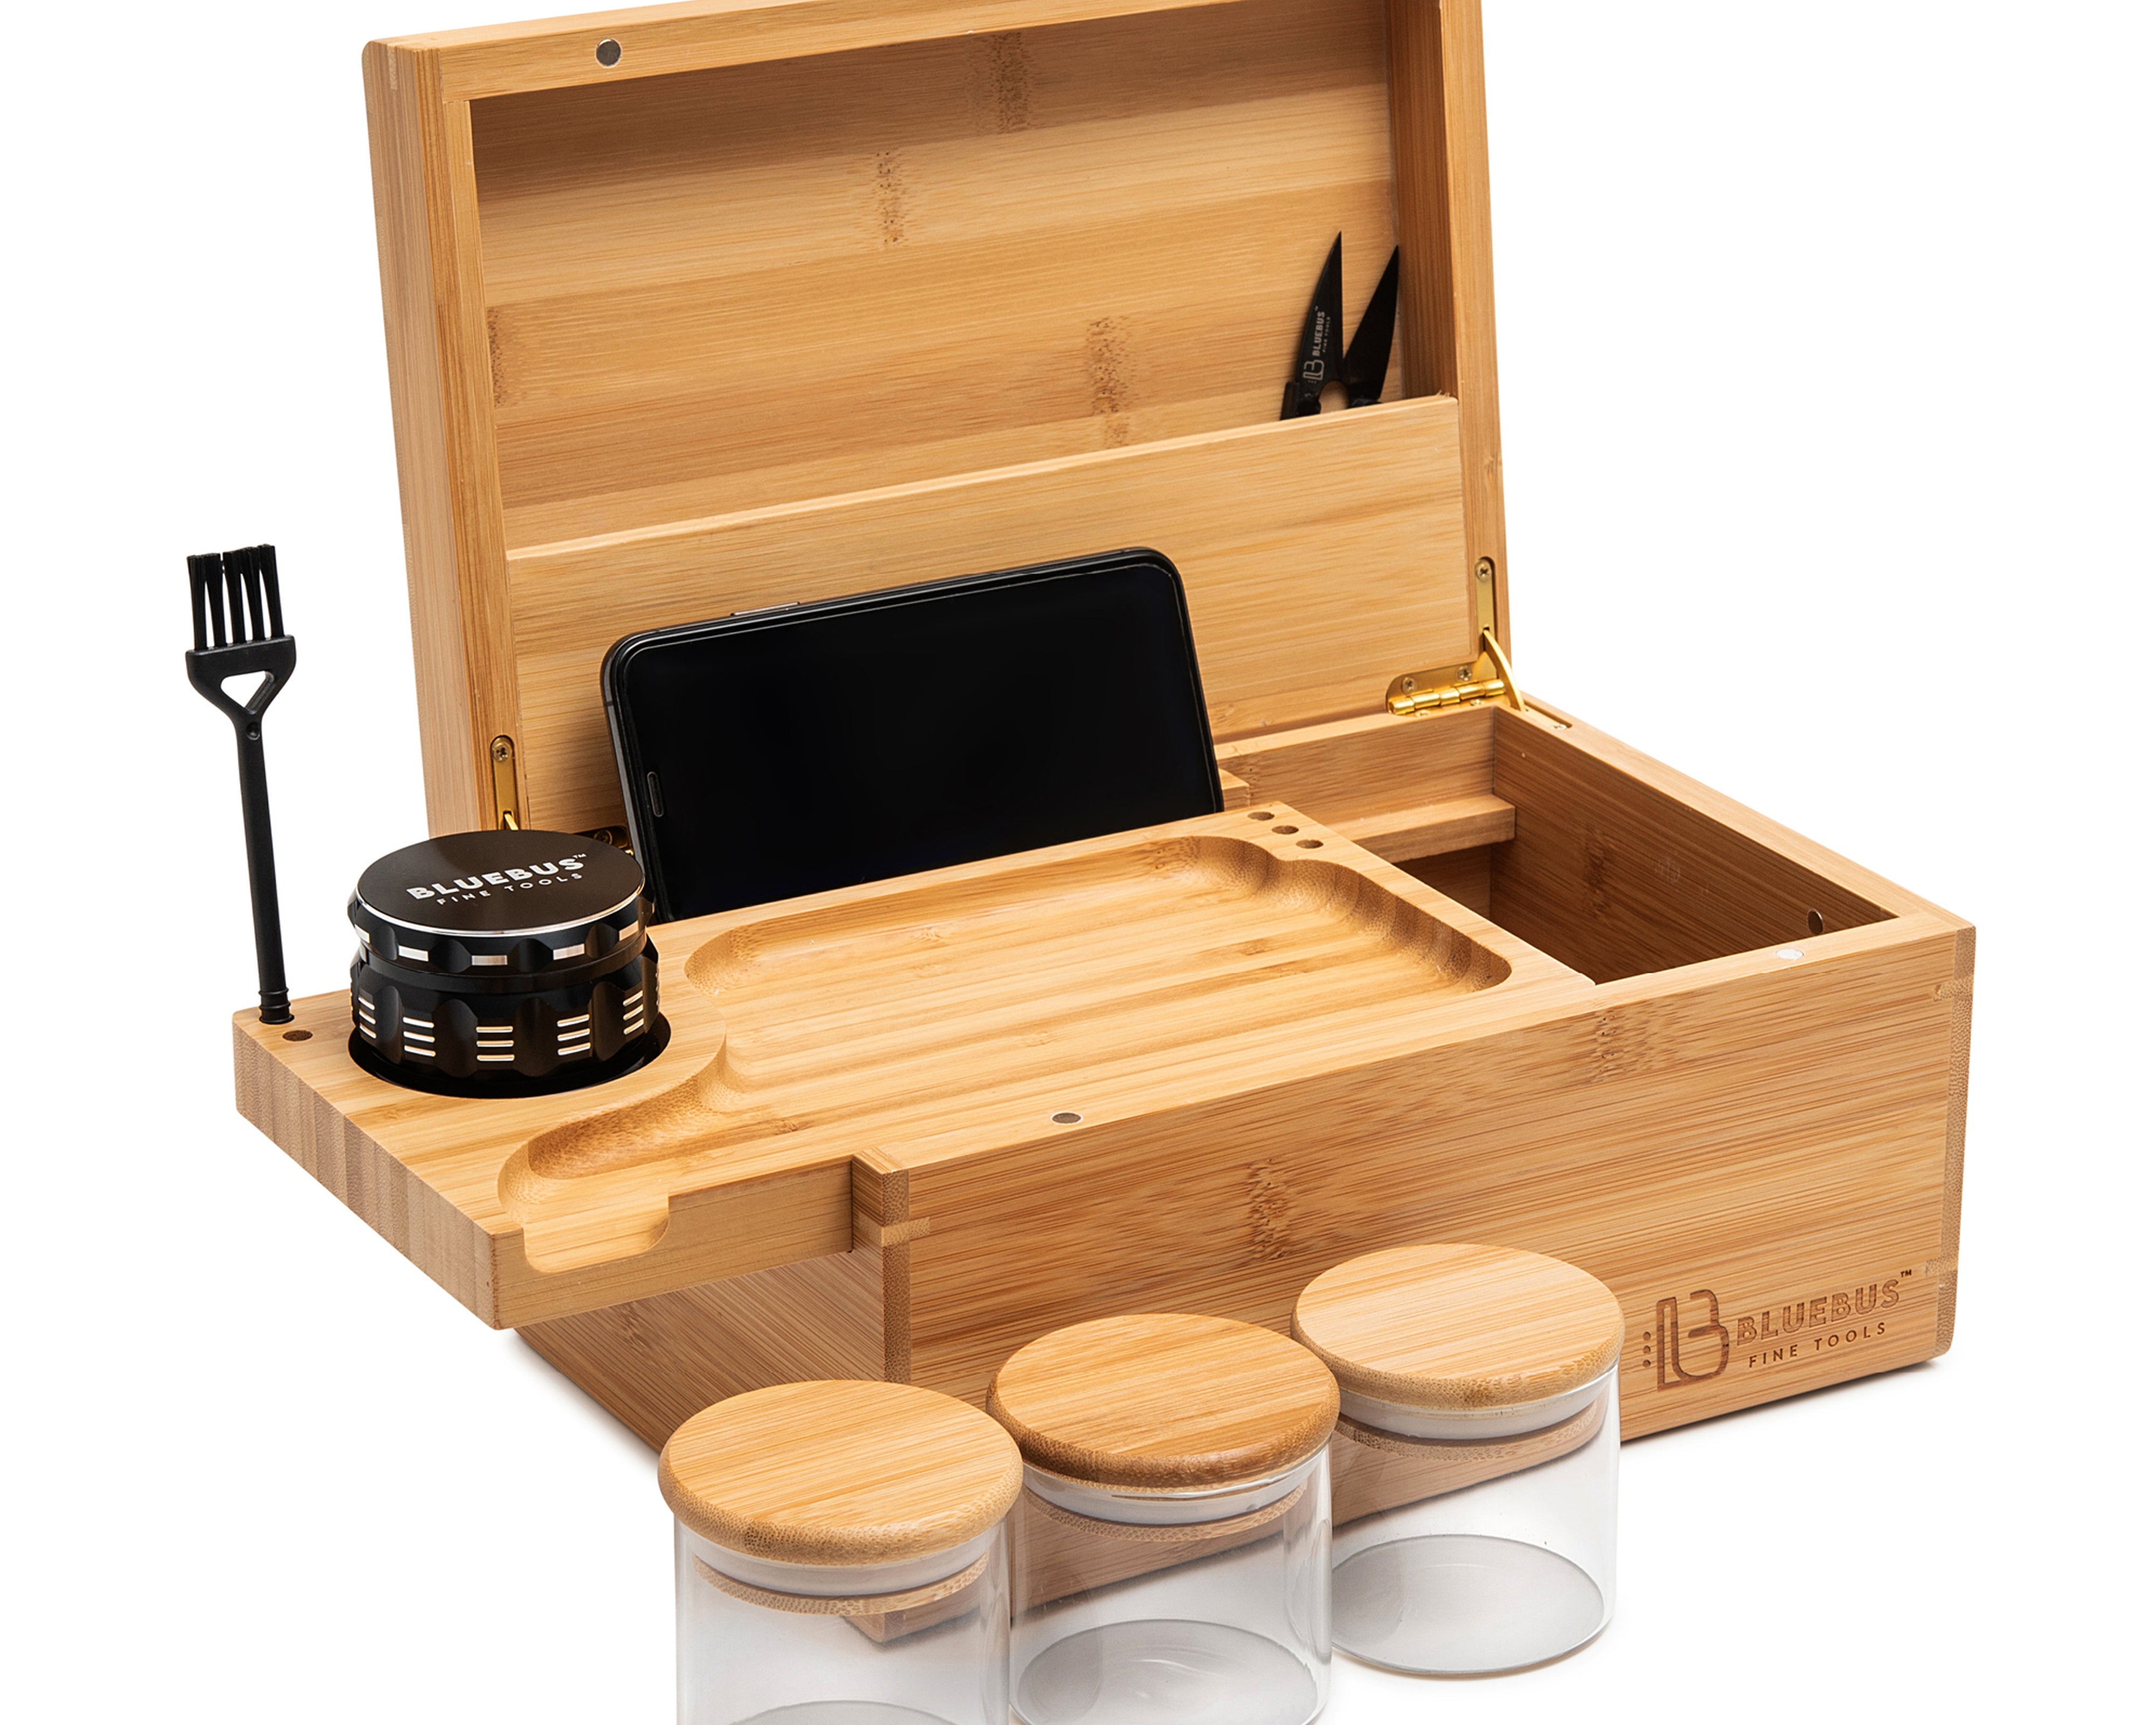 GENESIS storage stash box - a stylish and functional storage solution for organizing and storing various items